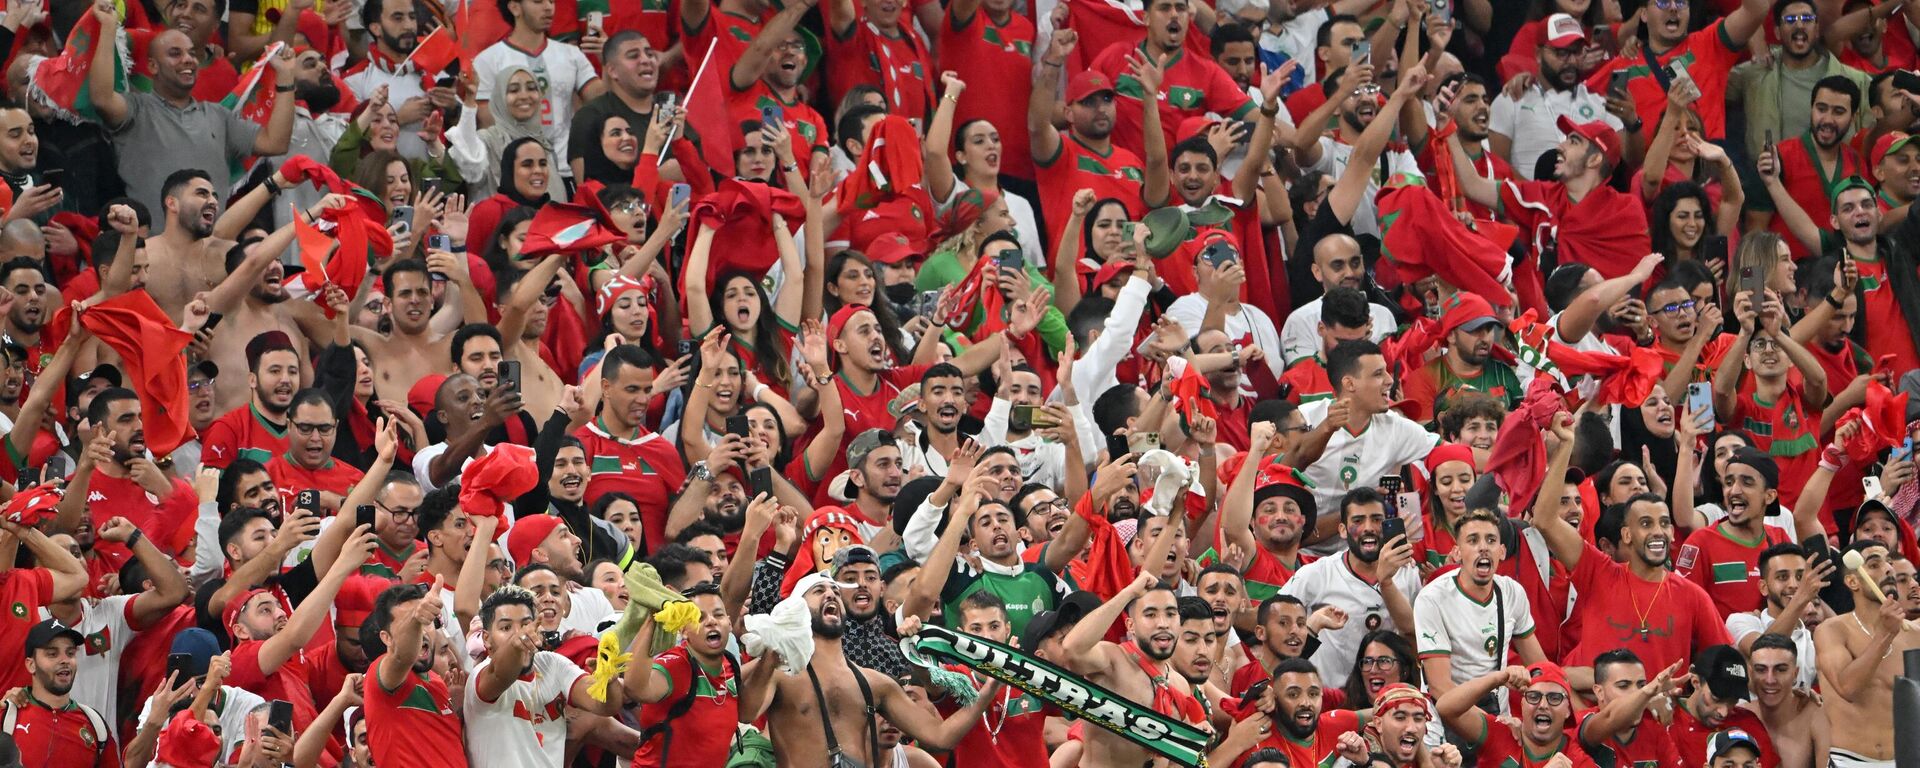 Morocco fans celebrate their team winning the Qatar 2022 World Cup quarter-final football match between Morocco and Portugal at the Al-Thumama Stadium in Doha on December 10, 2022.  - Sputnik International, 1920, 10.12.2022